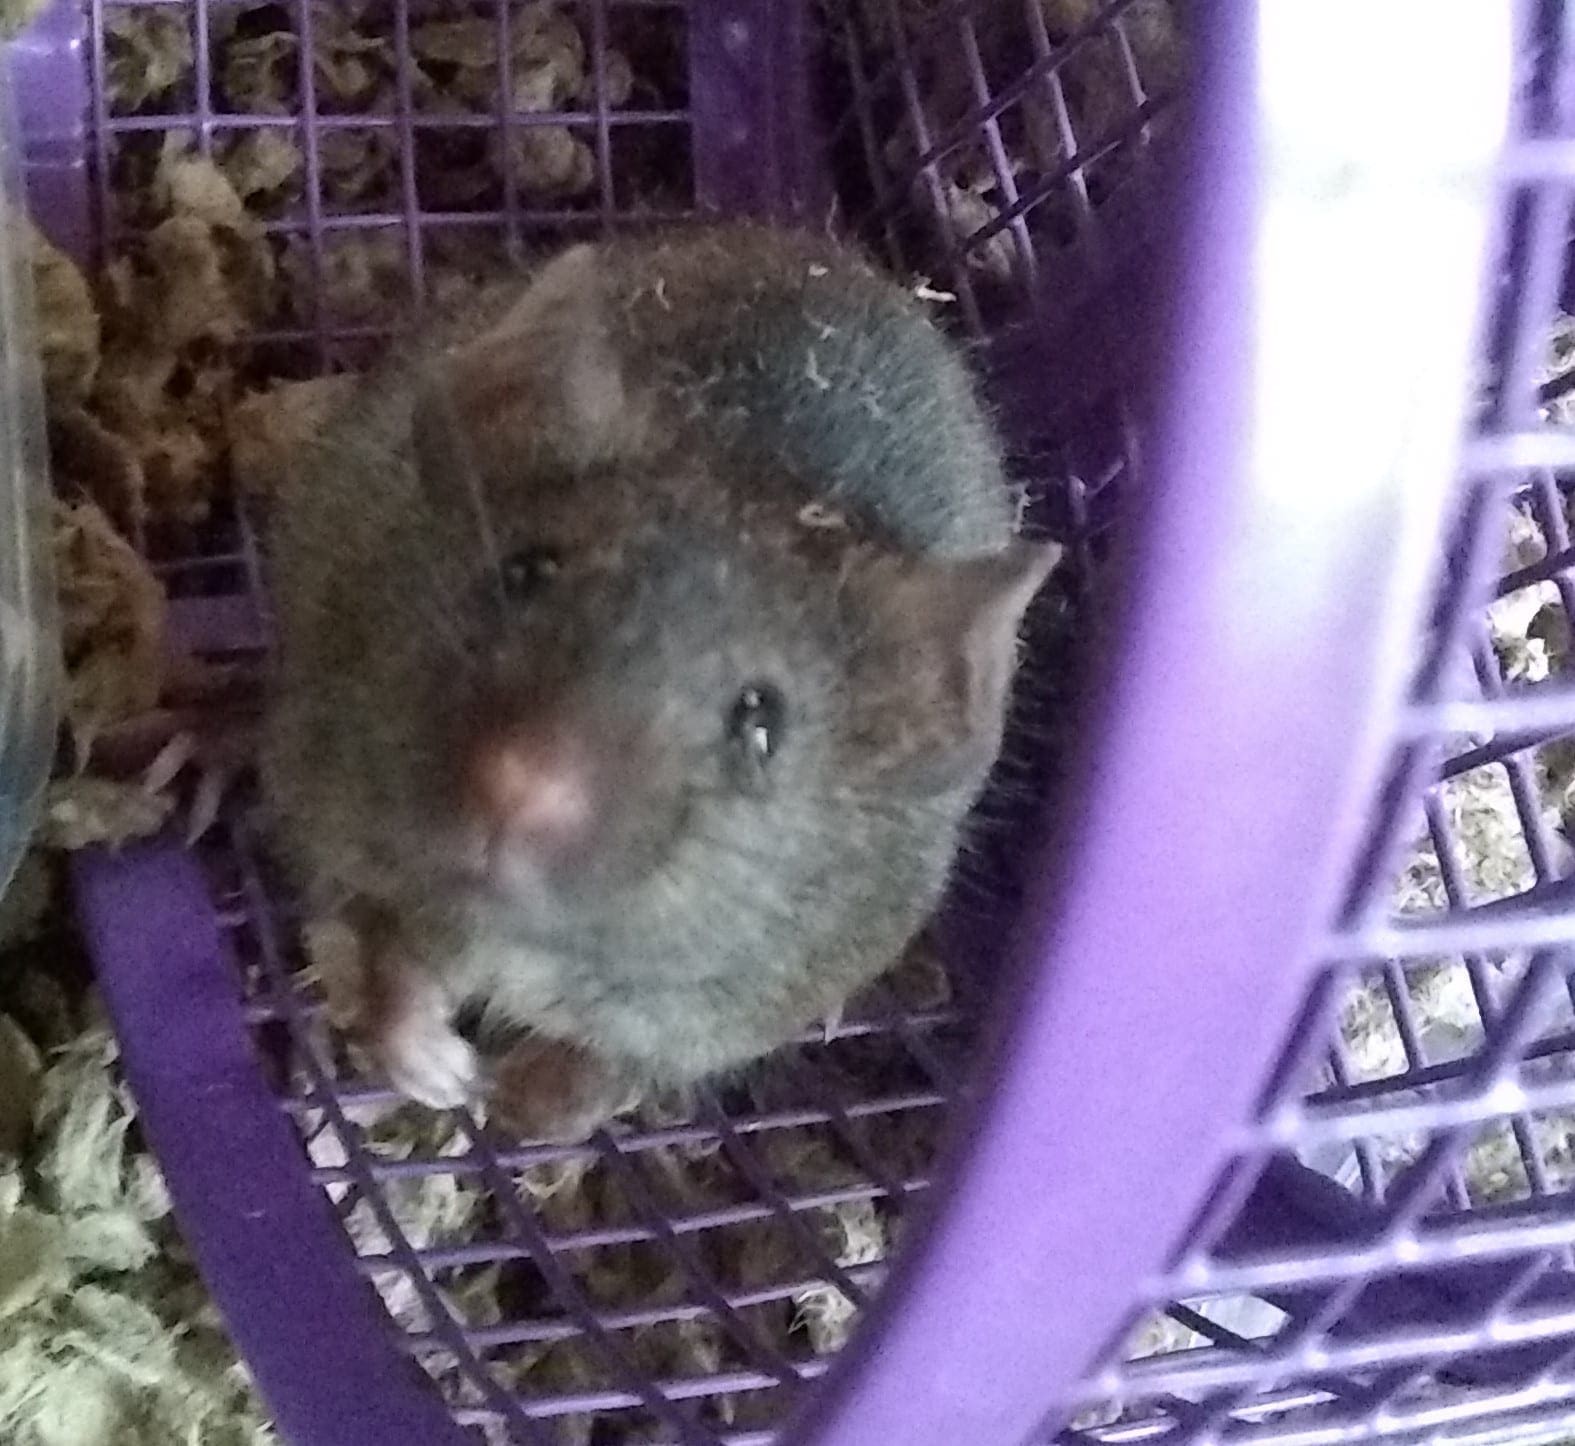 Brown colored house mouse on exercise wheel